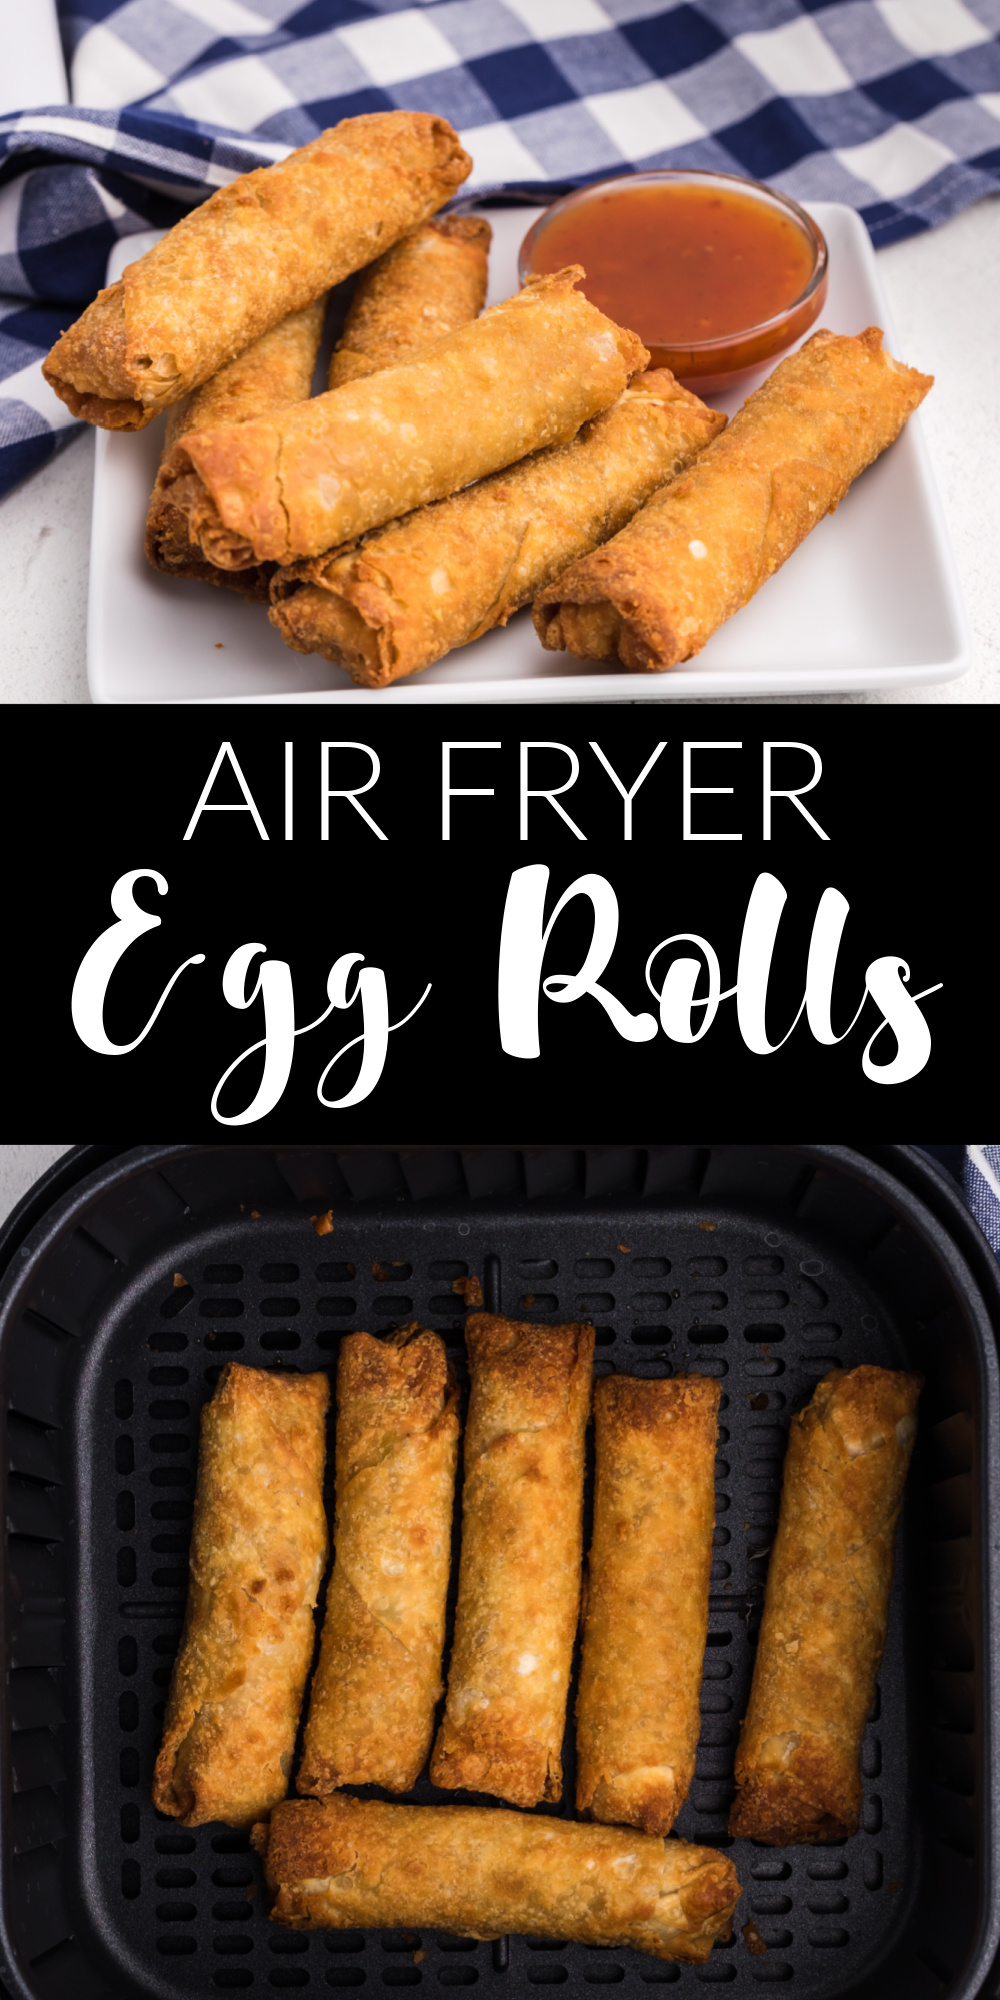 Egg rolls cooked in the air fryer are simply amazing. The outside is perfectly crispy, and the inside is warm, savory, and juicy. Every bite has a satisfying crunch from cabbage and a pop of color from carrots. Serve these tasty egg rolls with your favorite dipping sauce, and you've got a yummy appetizer or snack that everyone will enjoy in less than 10 minutes!